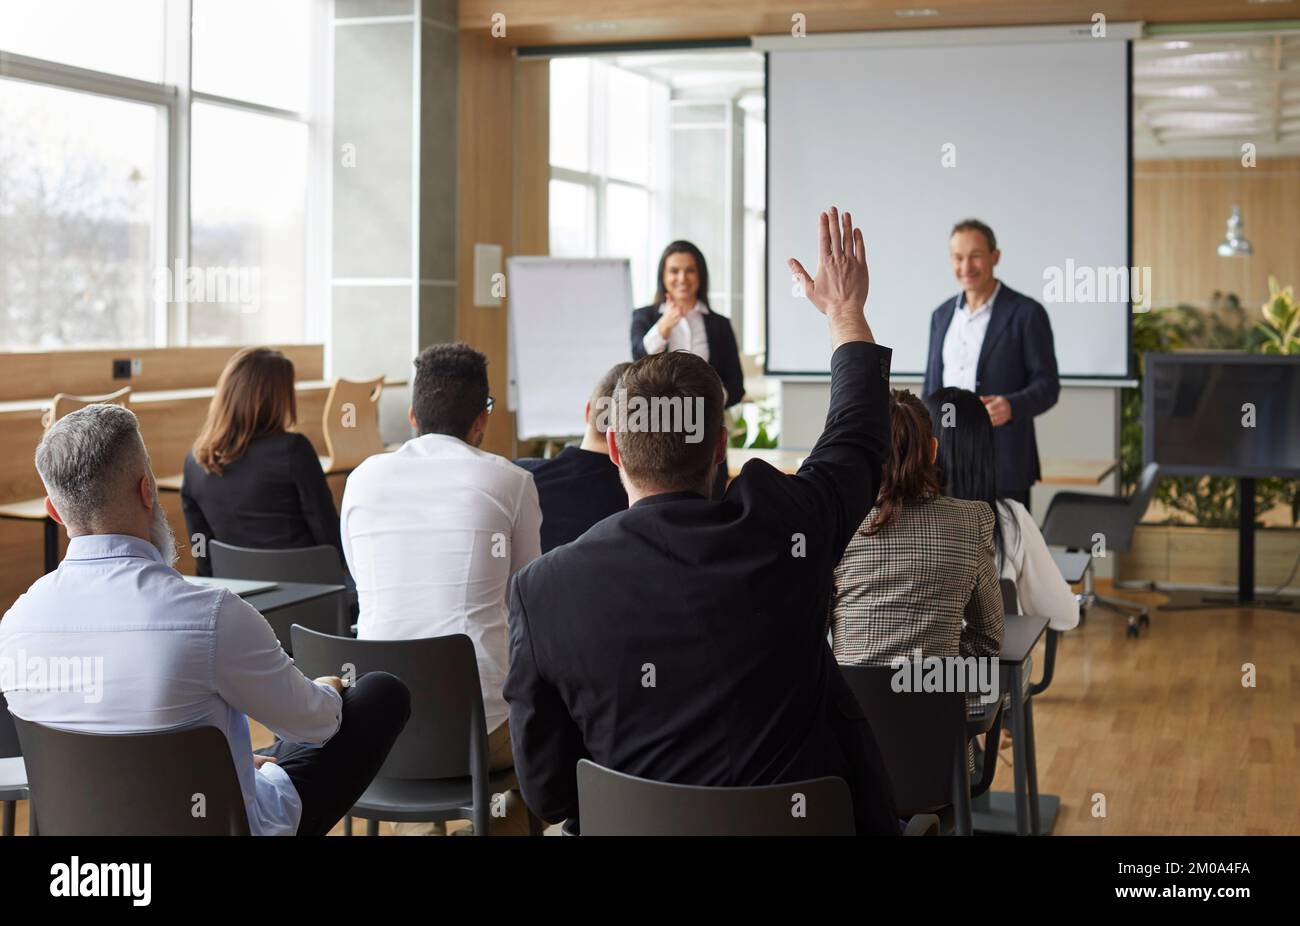 Man with raised hand wants to ask questions or express opinion during business presentation. Stock Photo